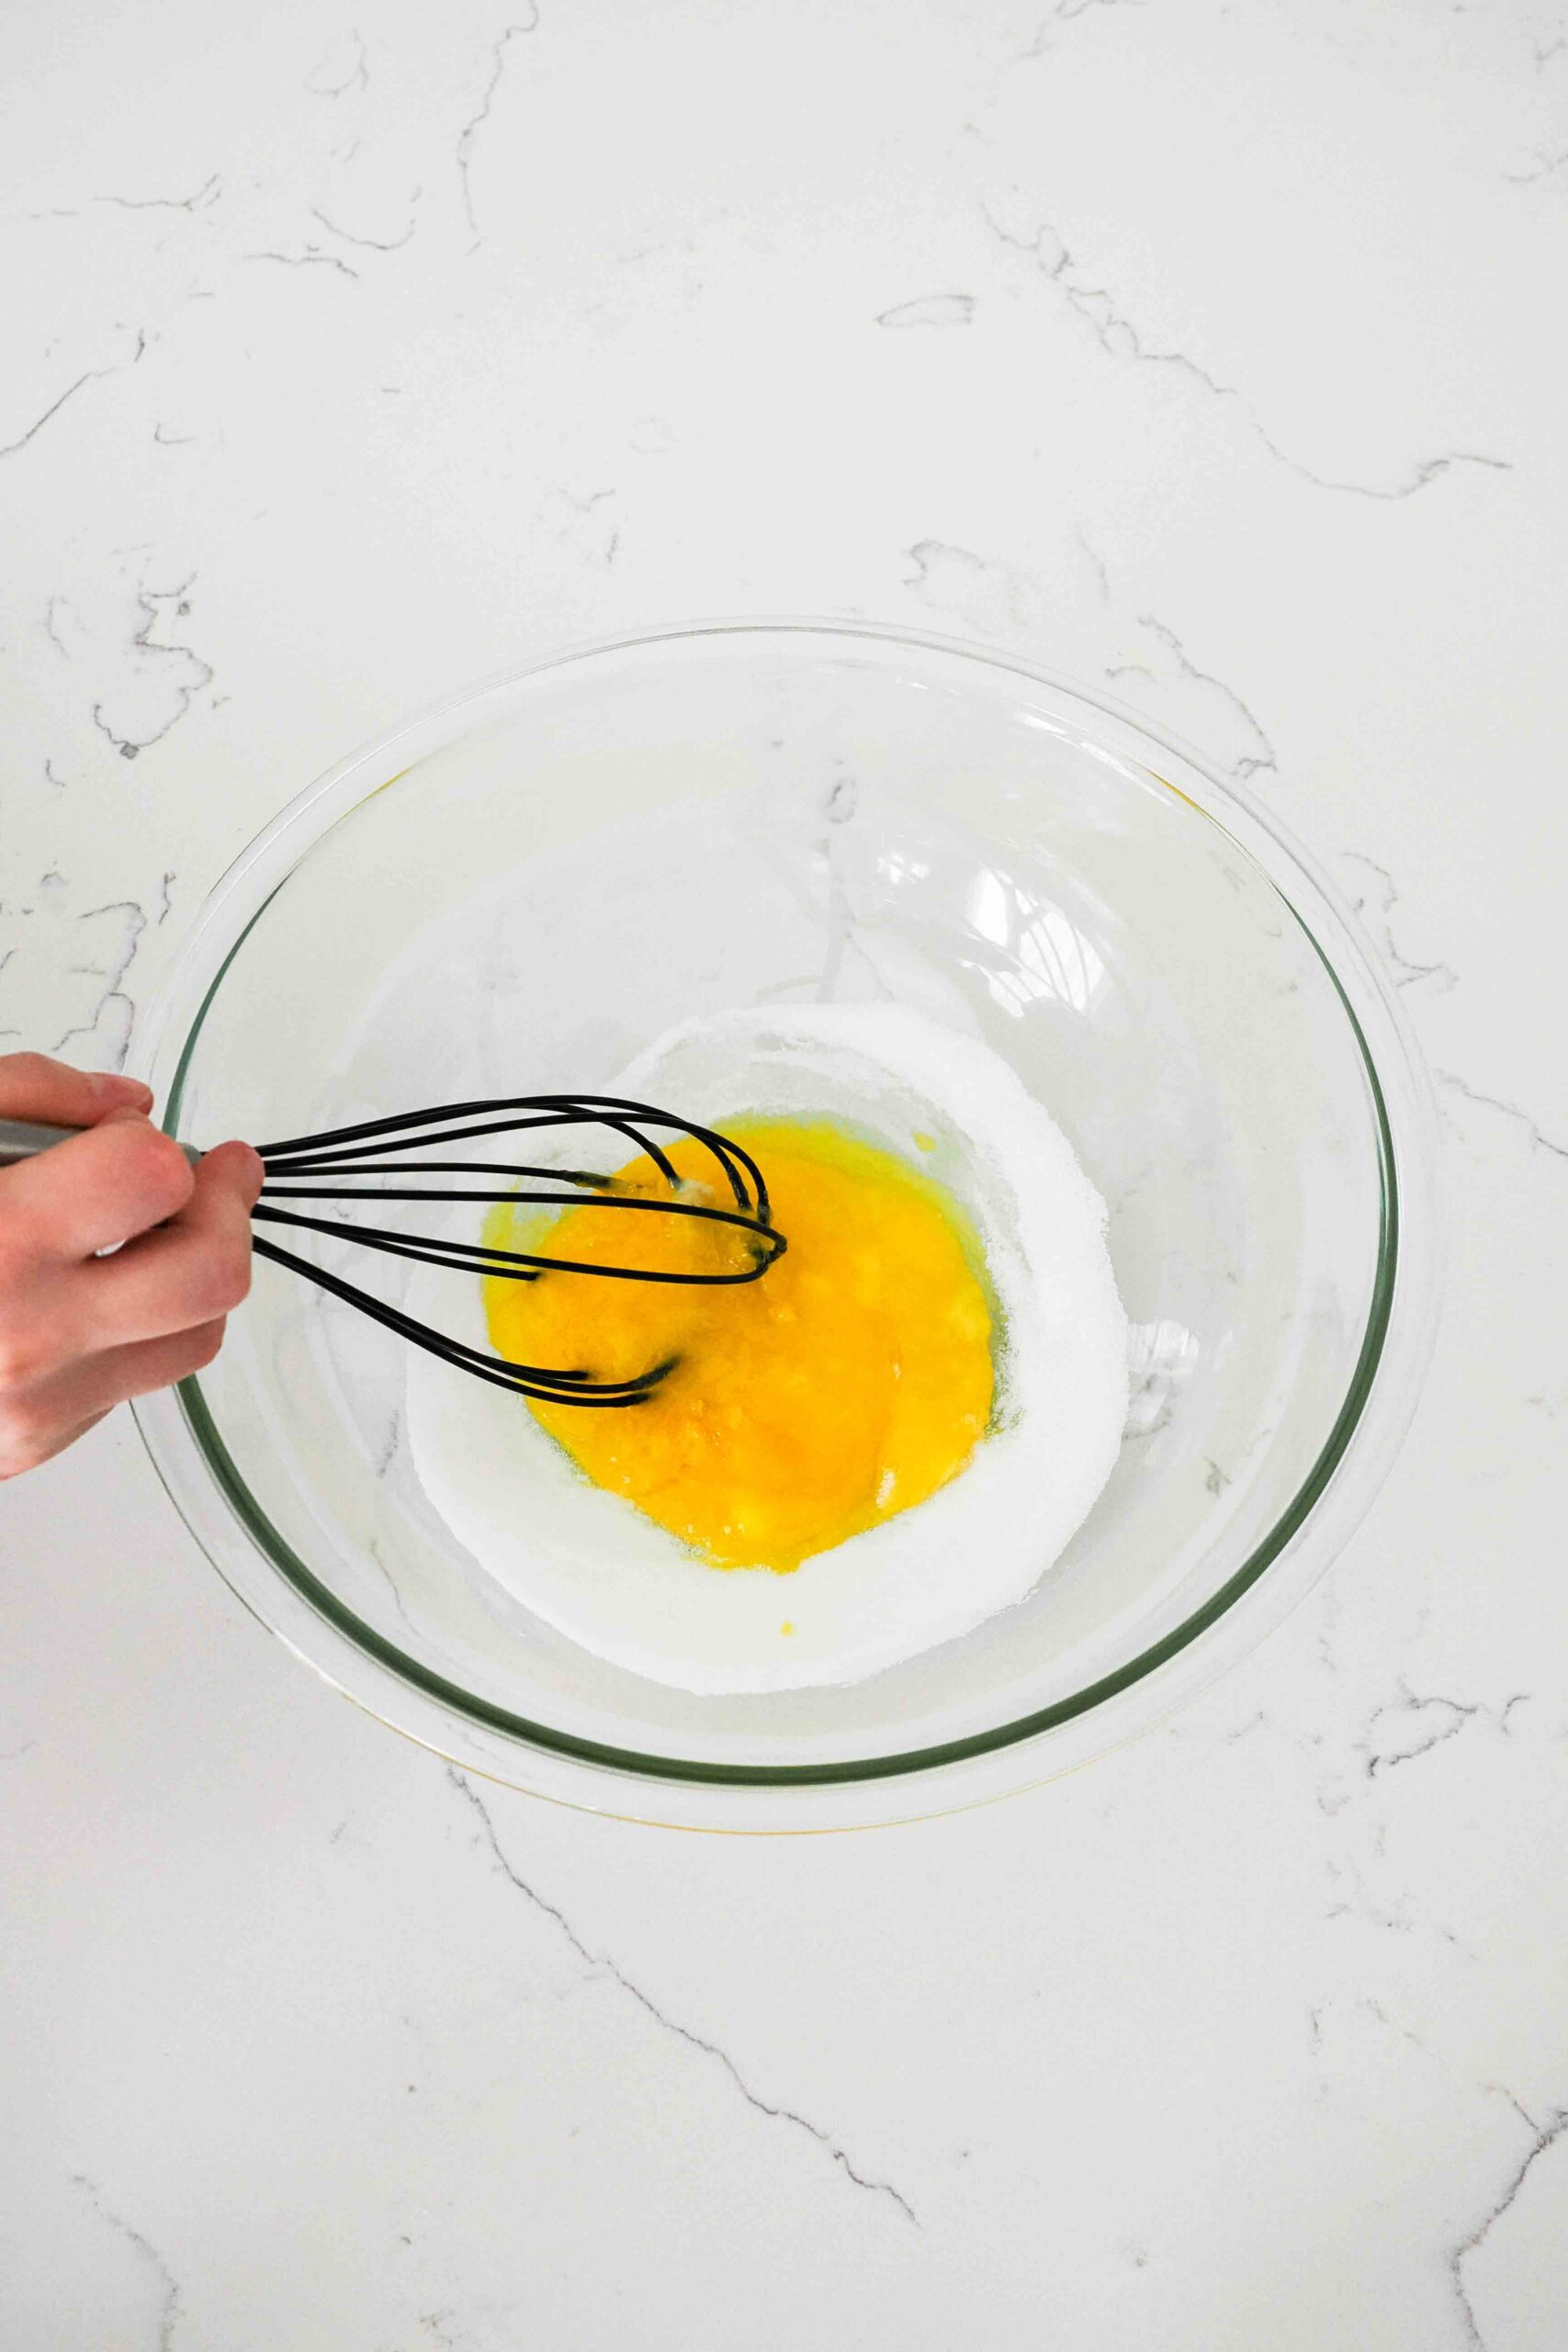 Egg yolks and sugar in a glass bowl beginning to be whisked together.